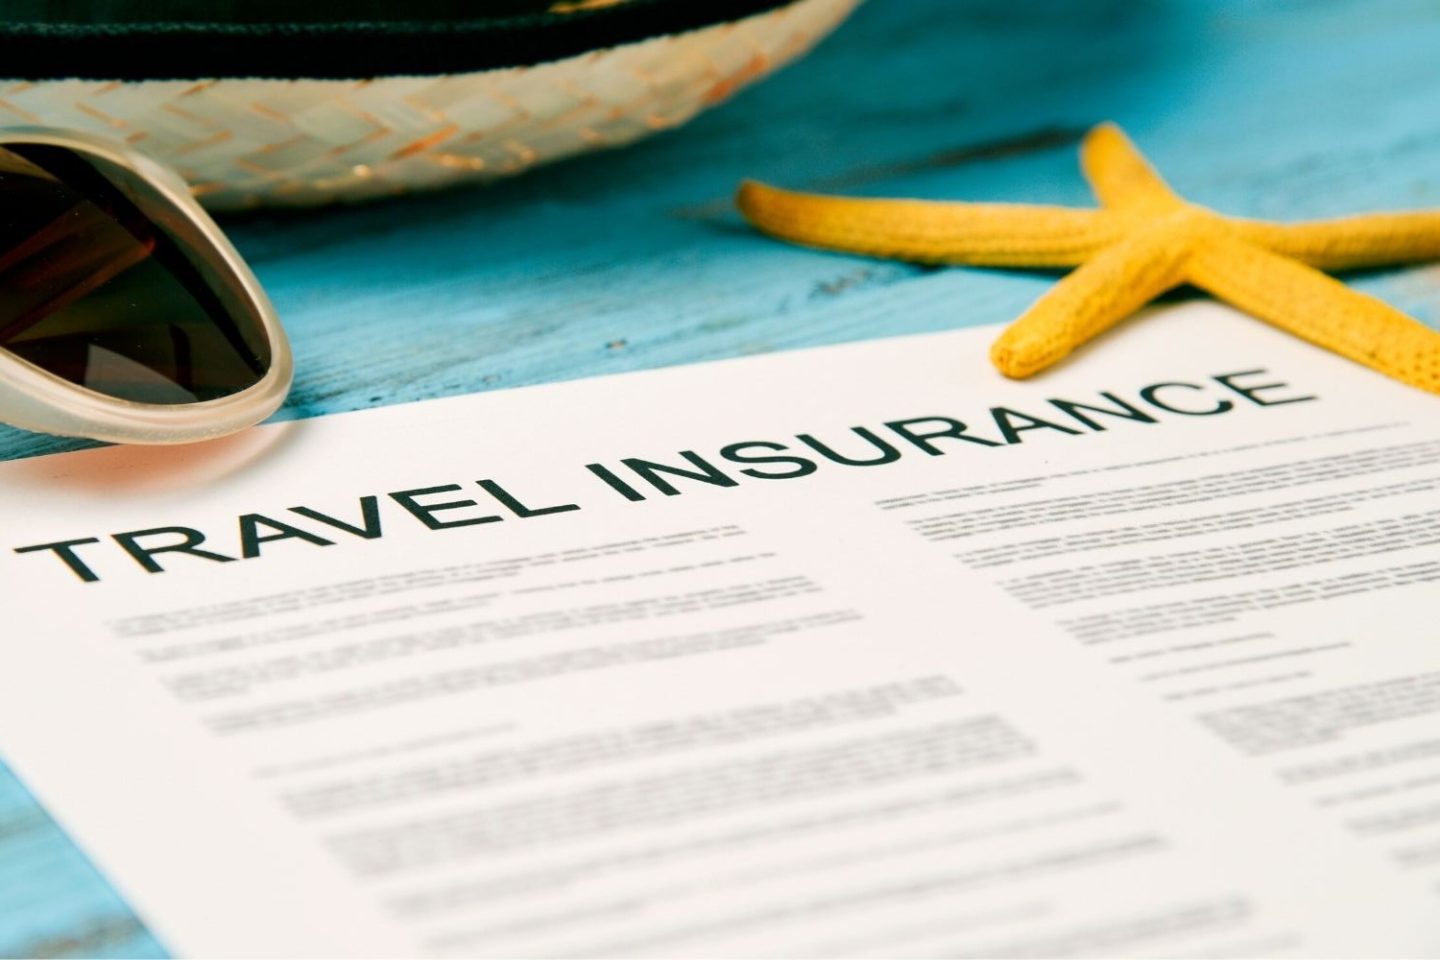 Travel insurance papers